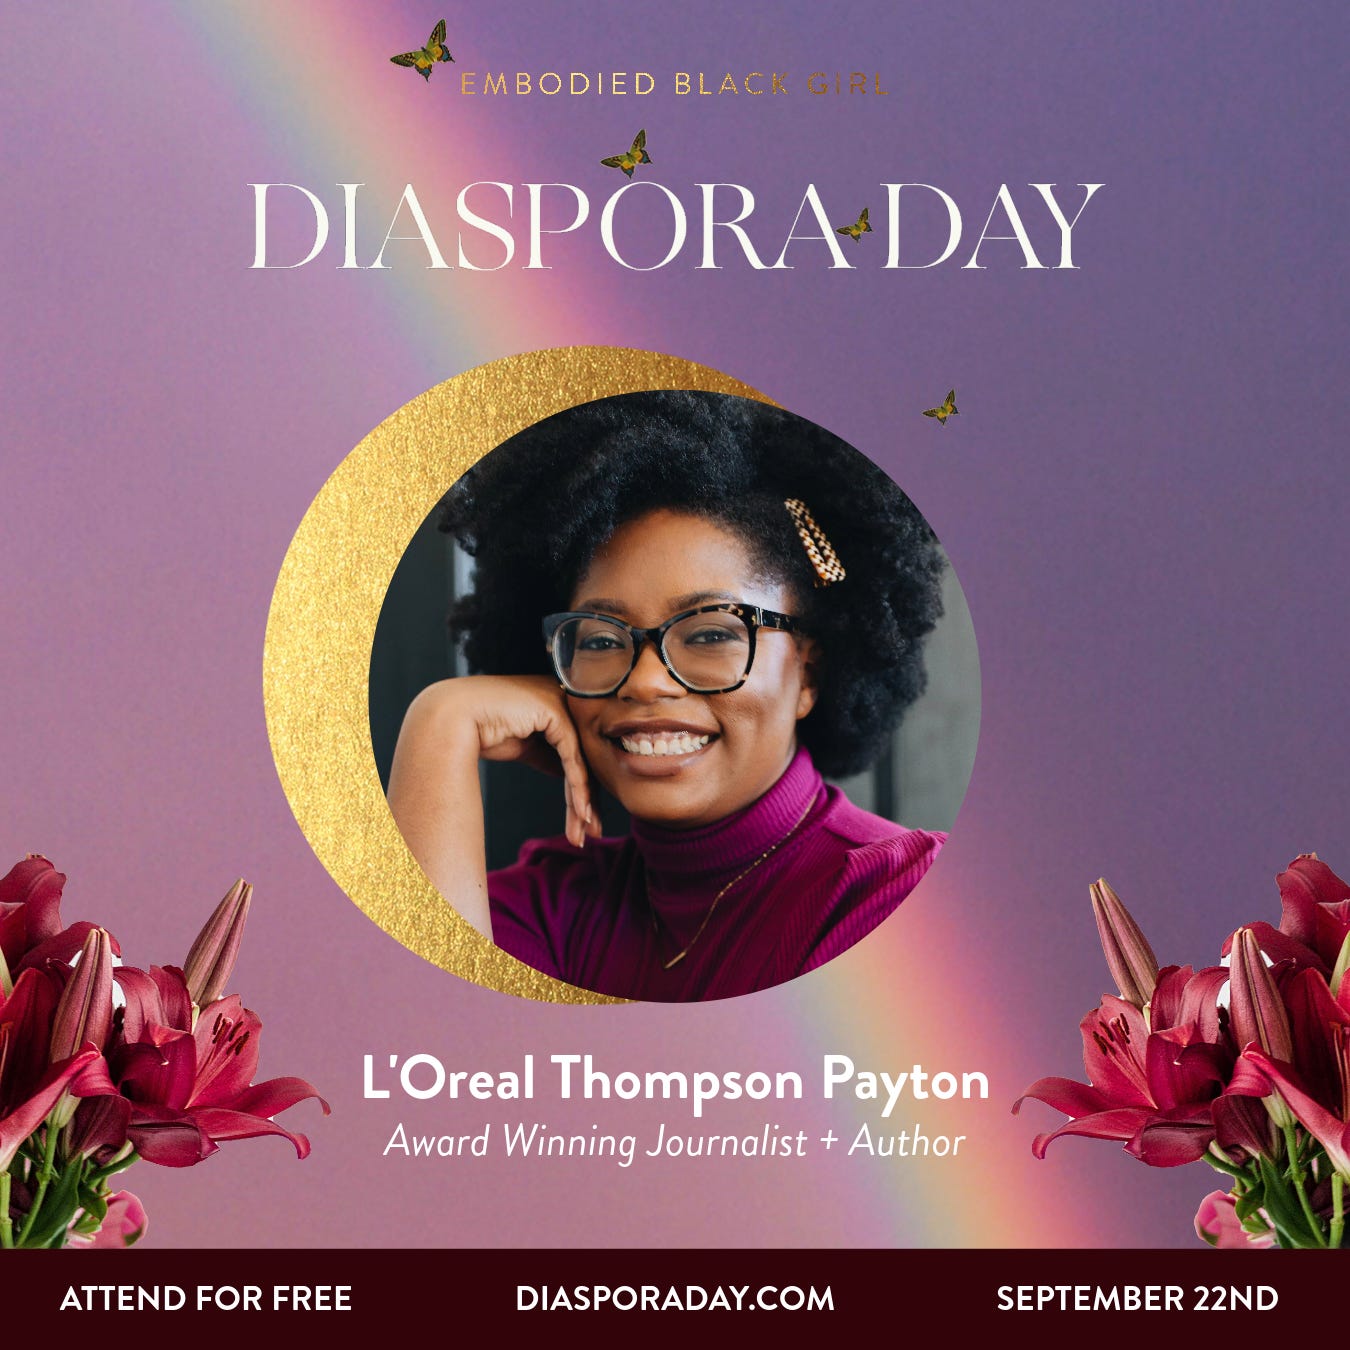 Graphic featuring a picture of a Black woman and text promoting an upcoming virtual festival for Diaspora Day